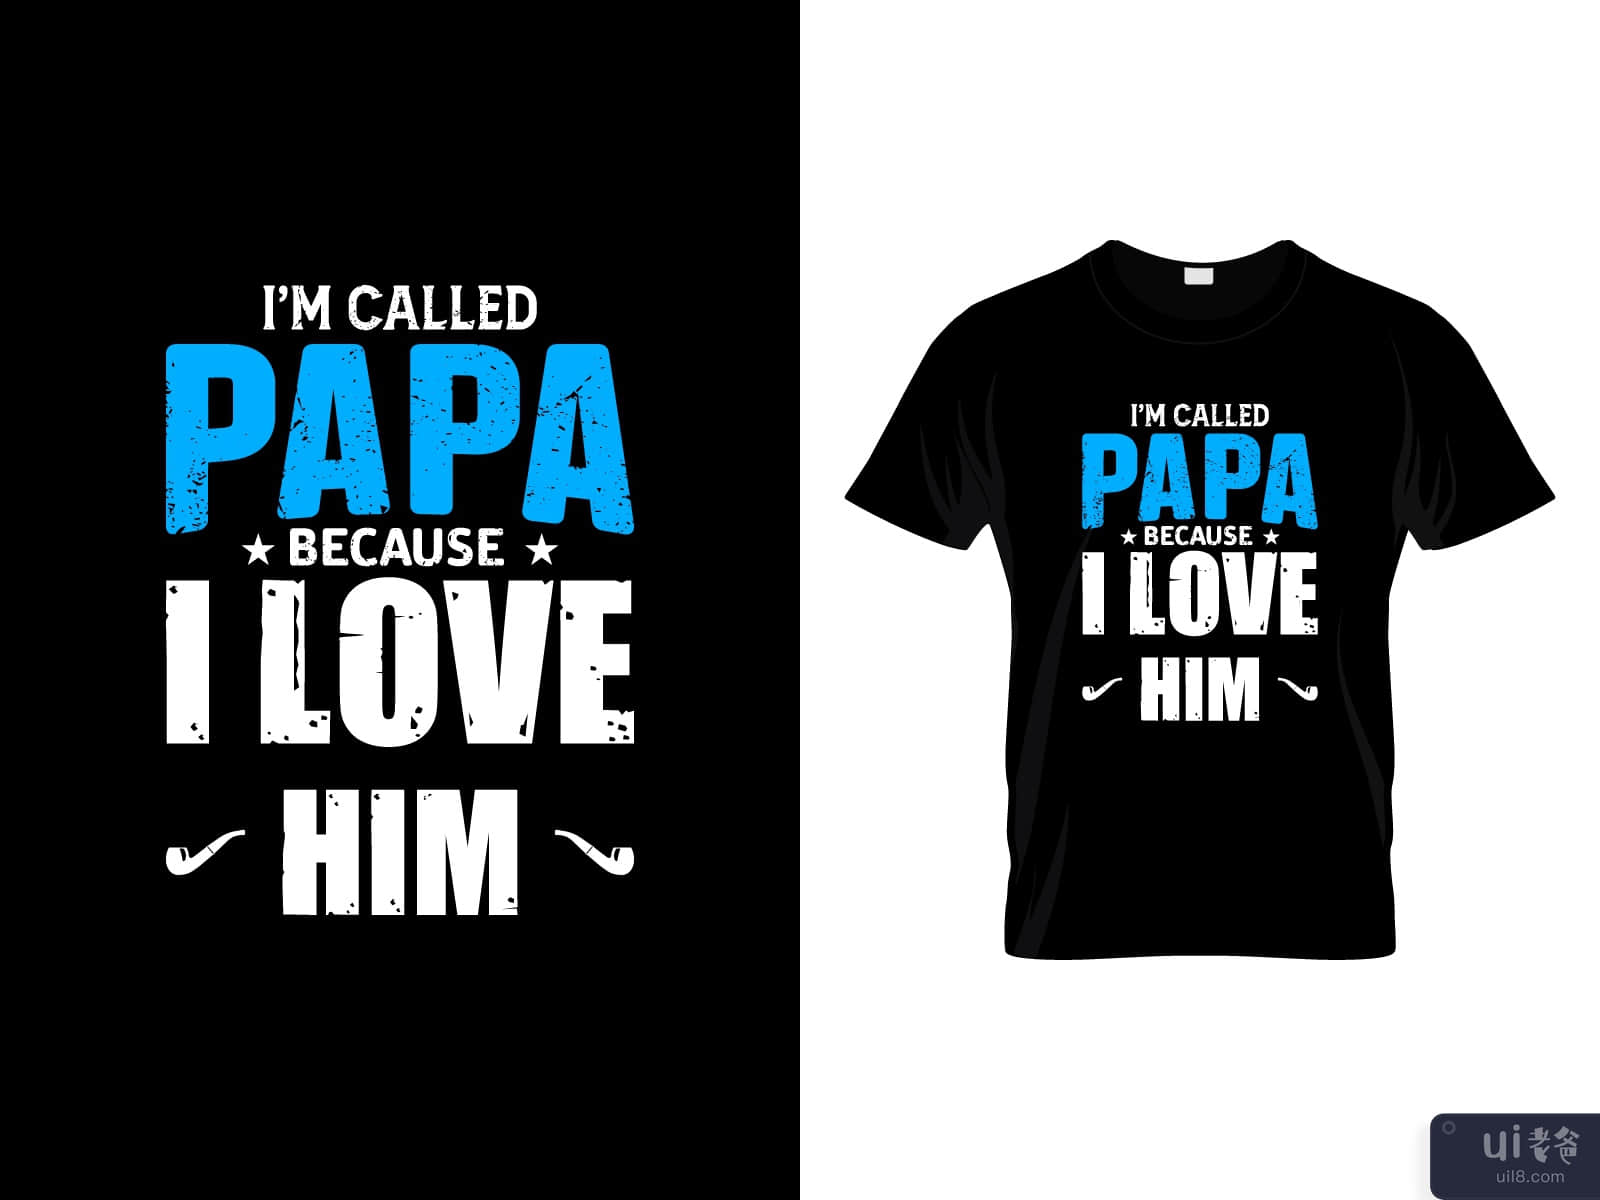 Fathers day t-shirt design vector, Amazing t-shirt design